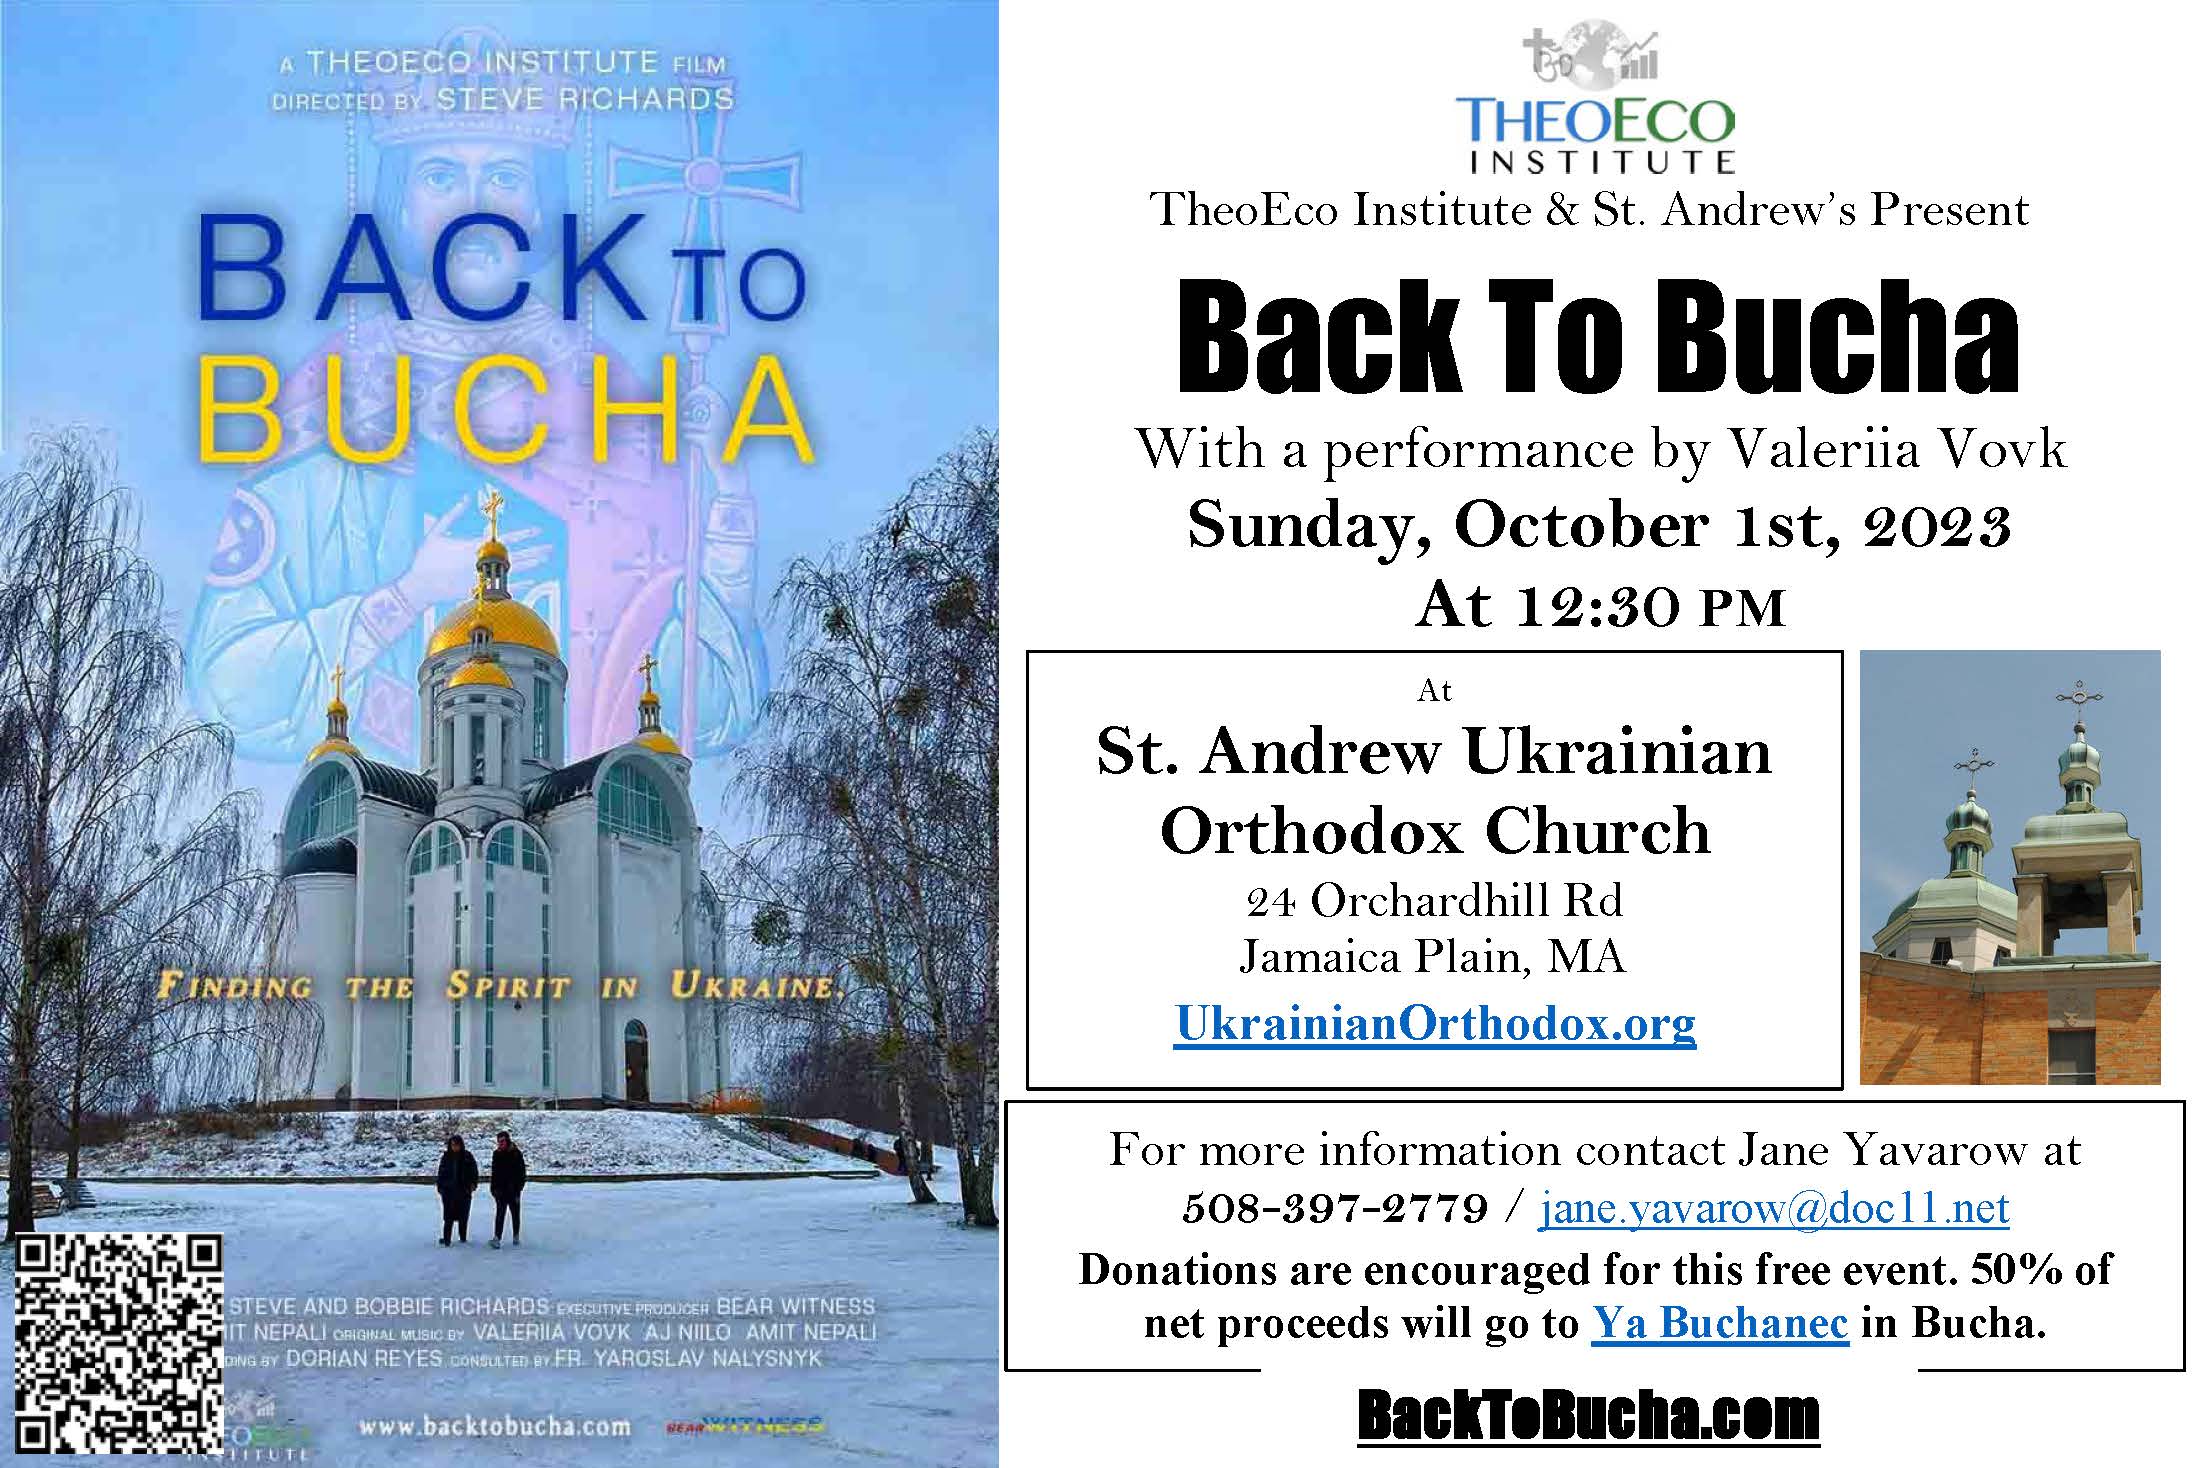 Back to Bucha Screening at St. Andrew in Jamaica Plain